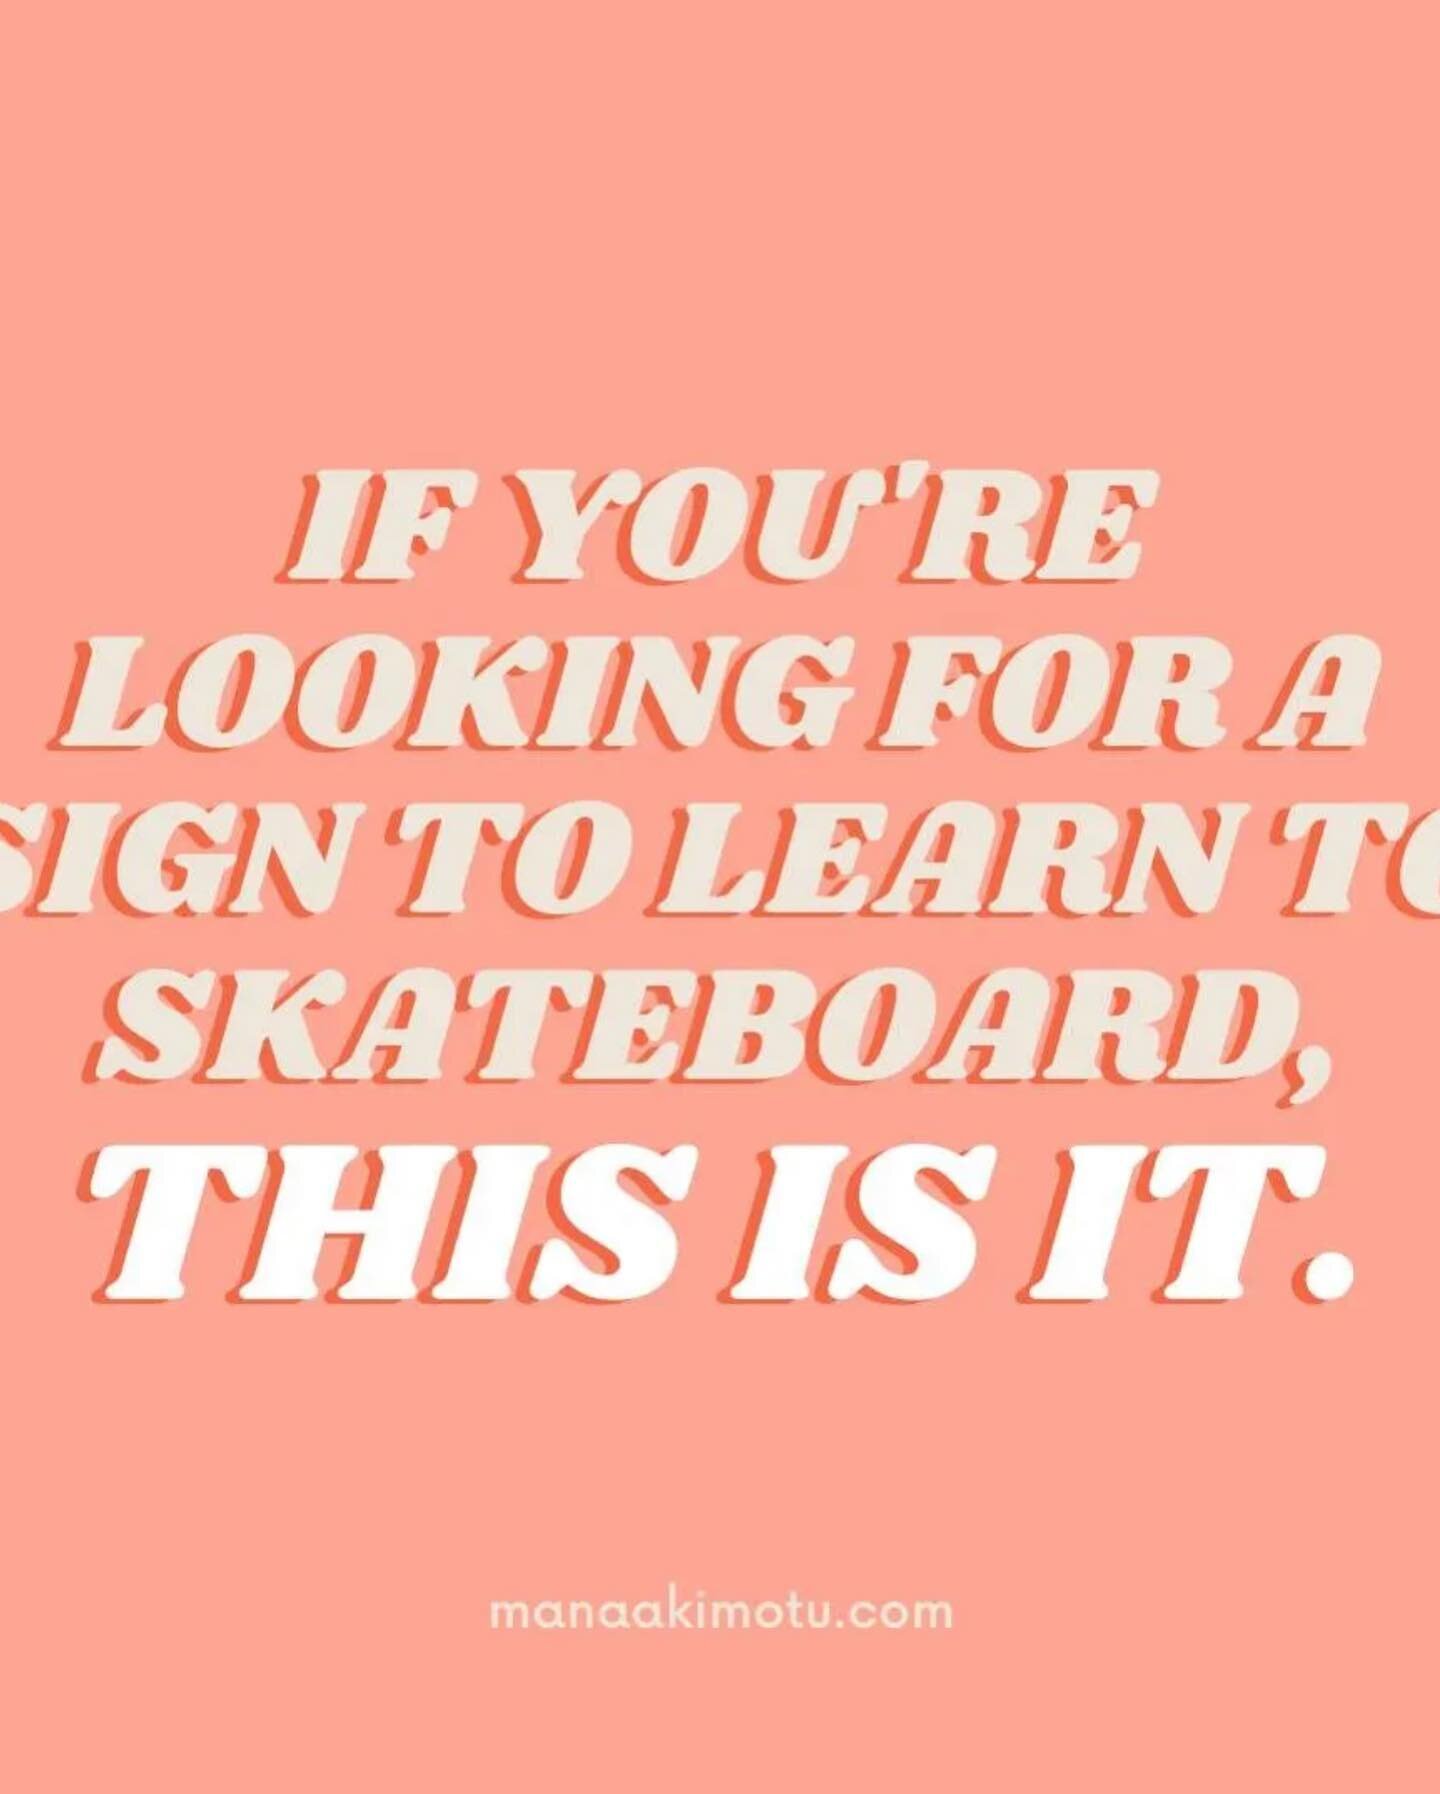 Introducing the latest small business listed on the Betty directory: @manaaki_motu 

Gina Reed is a skateboard coach specialising in low-risk, high joy coaching for wāhine! 

She has put together an amazing online coaching course to get you up skatin